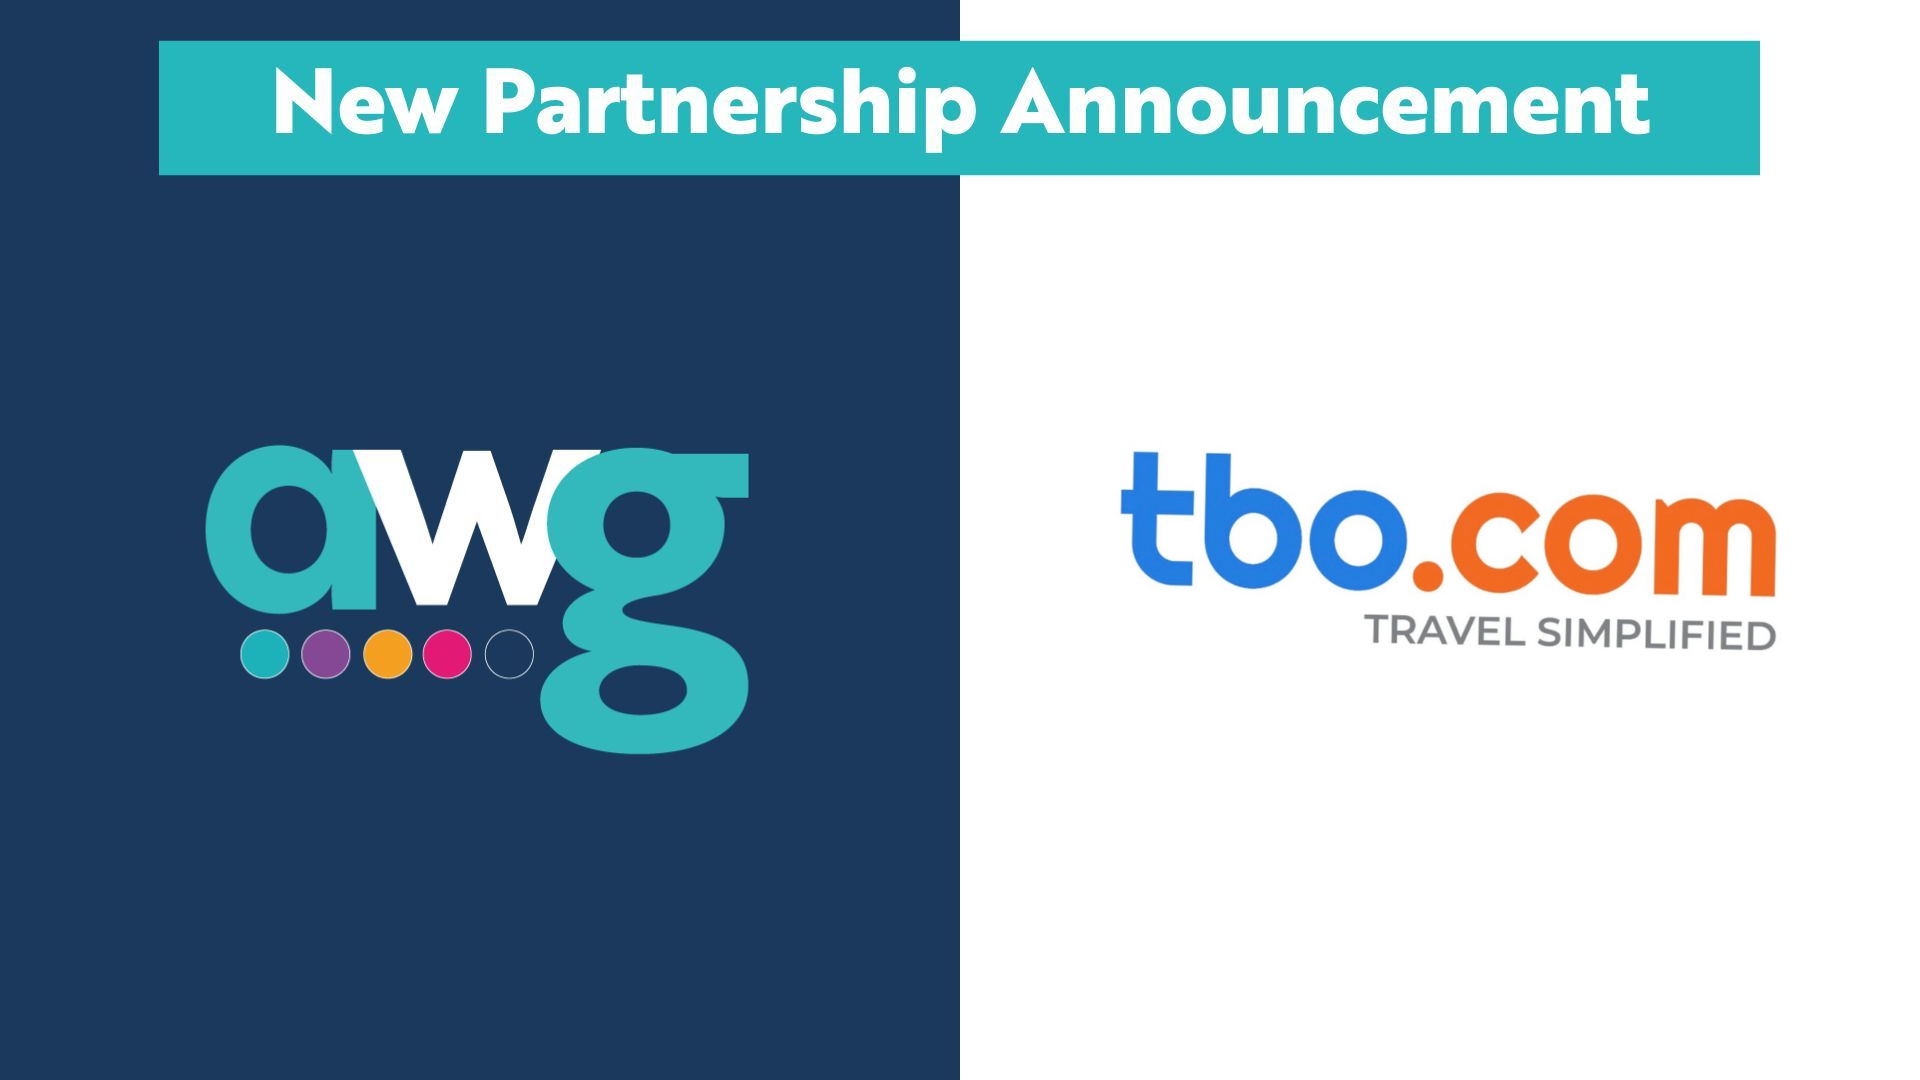 Tbo.com partners with WebEngage to deliver personalised services